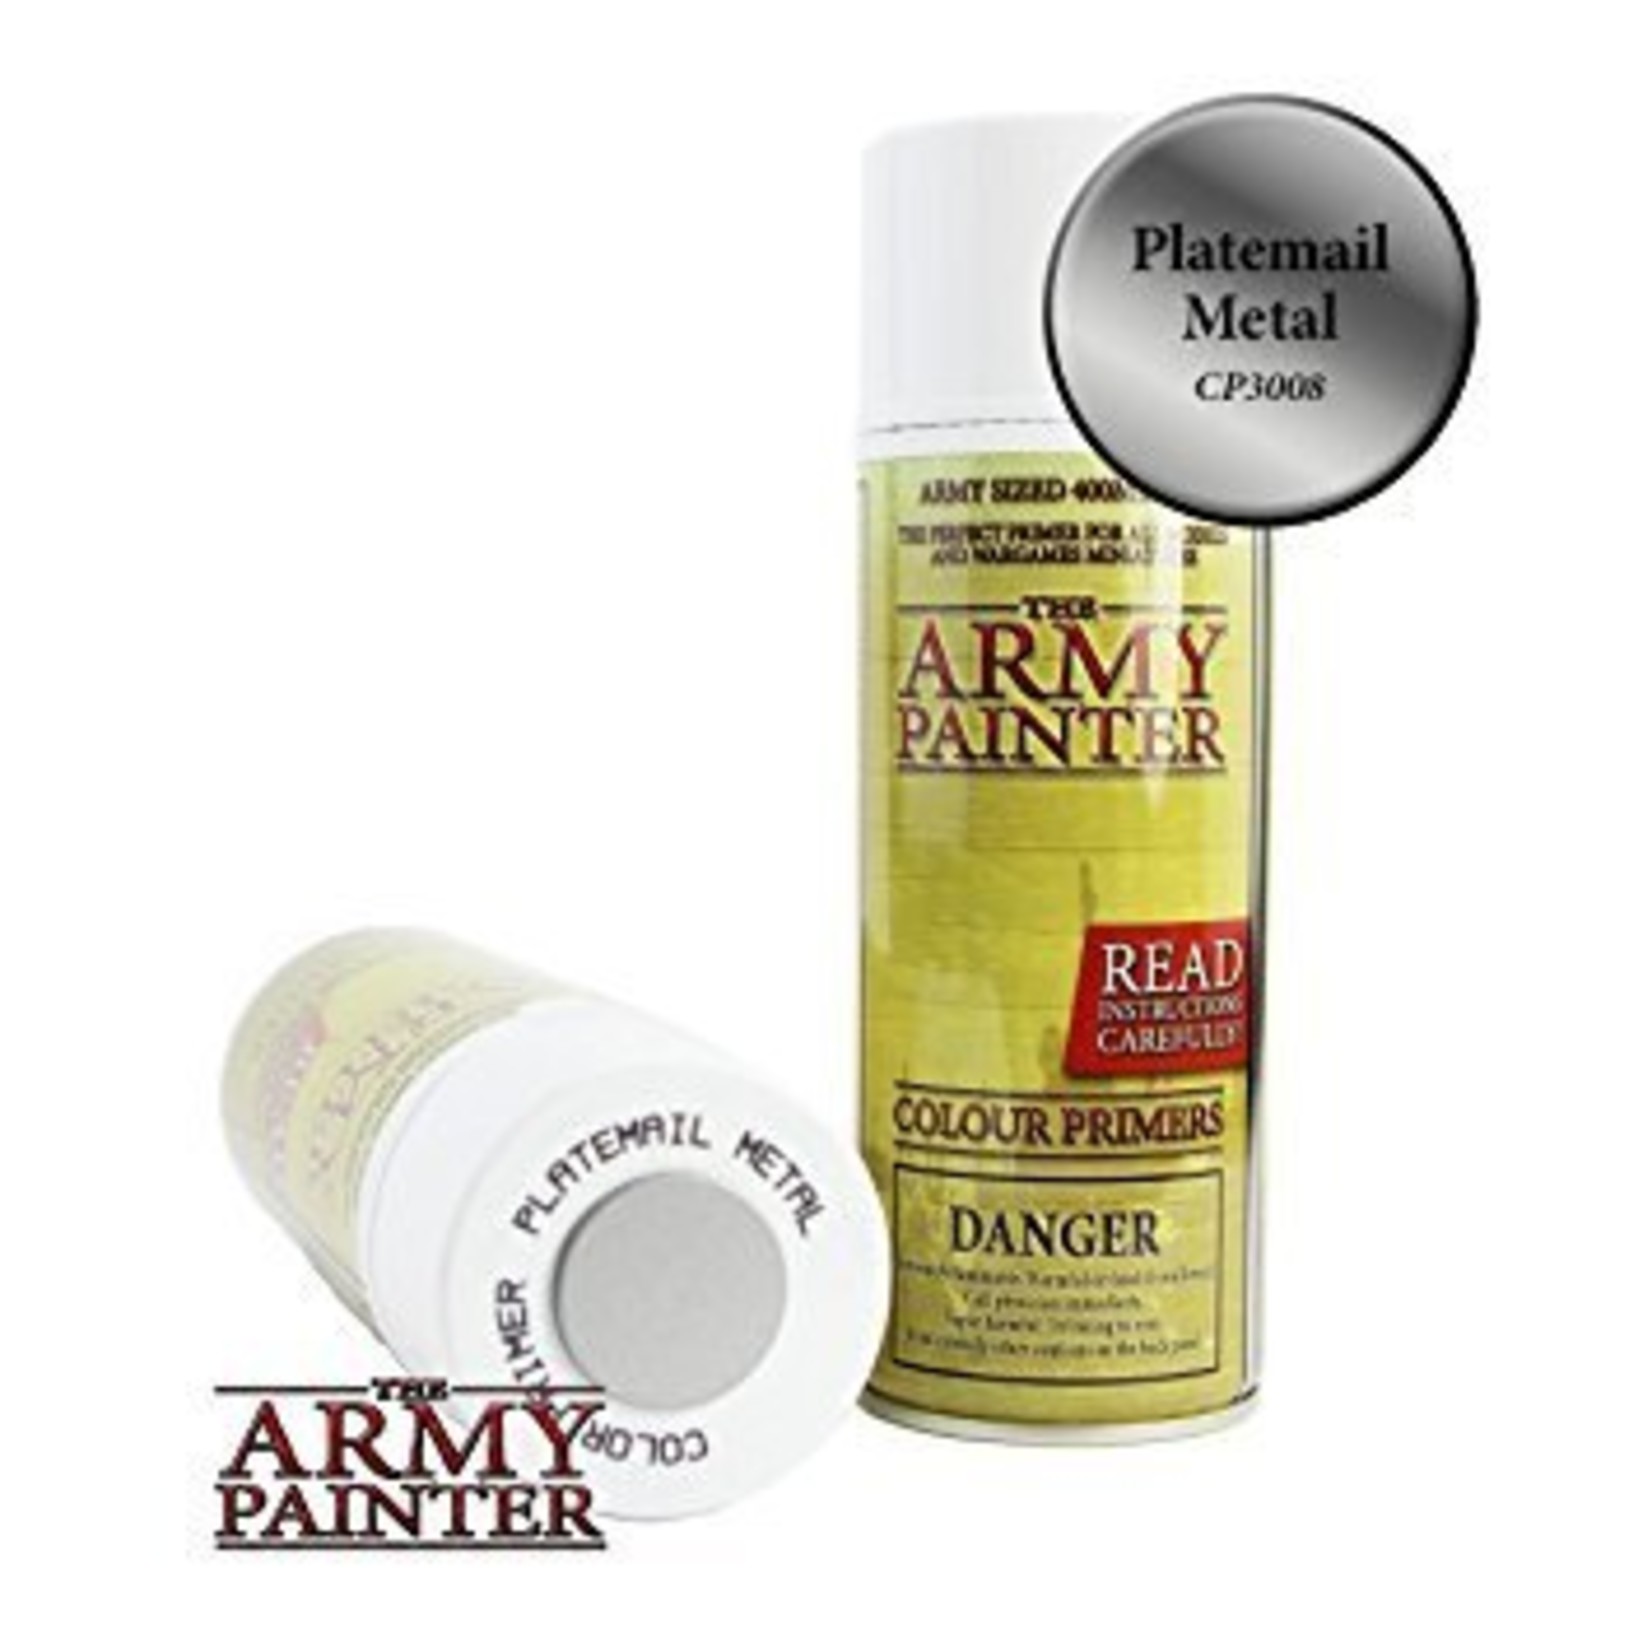 Army Painter Army Painter - Primer - Plate Mail Metal